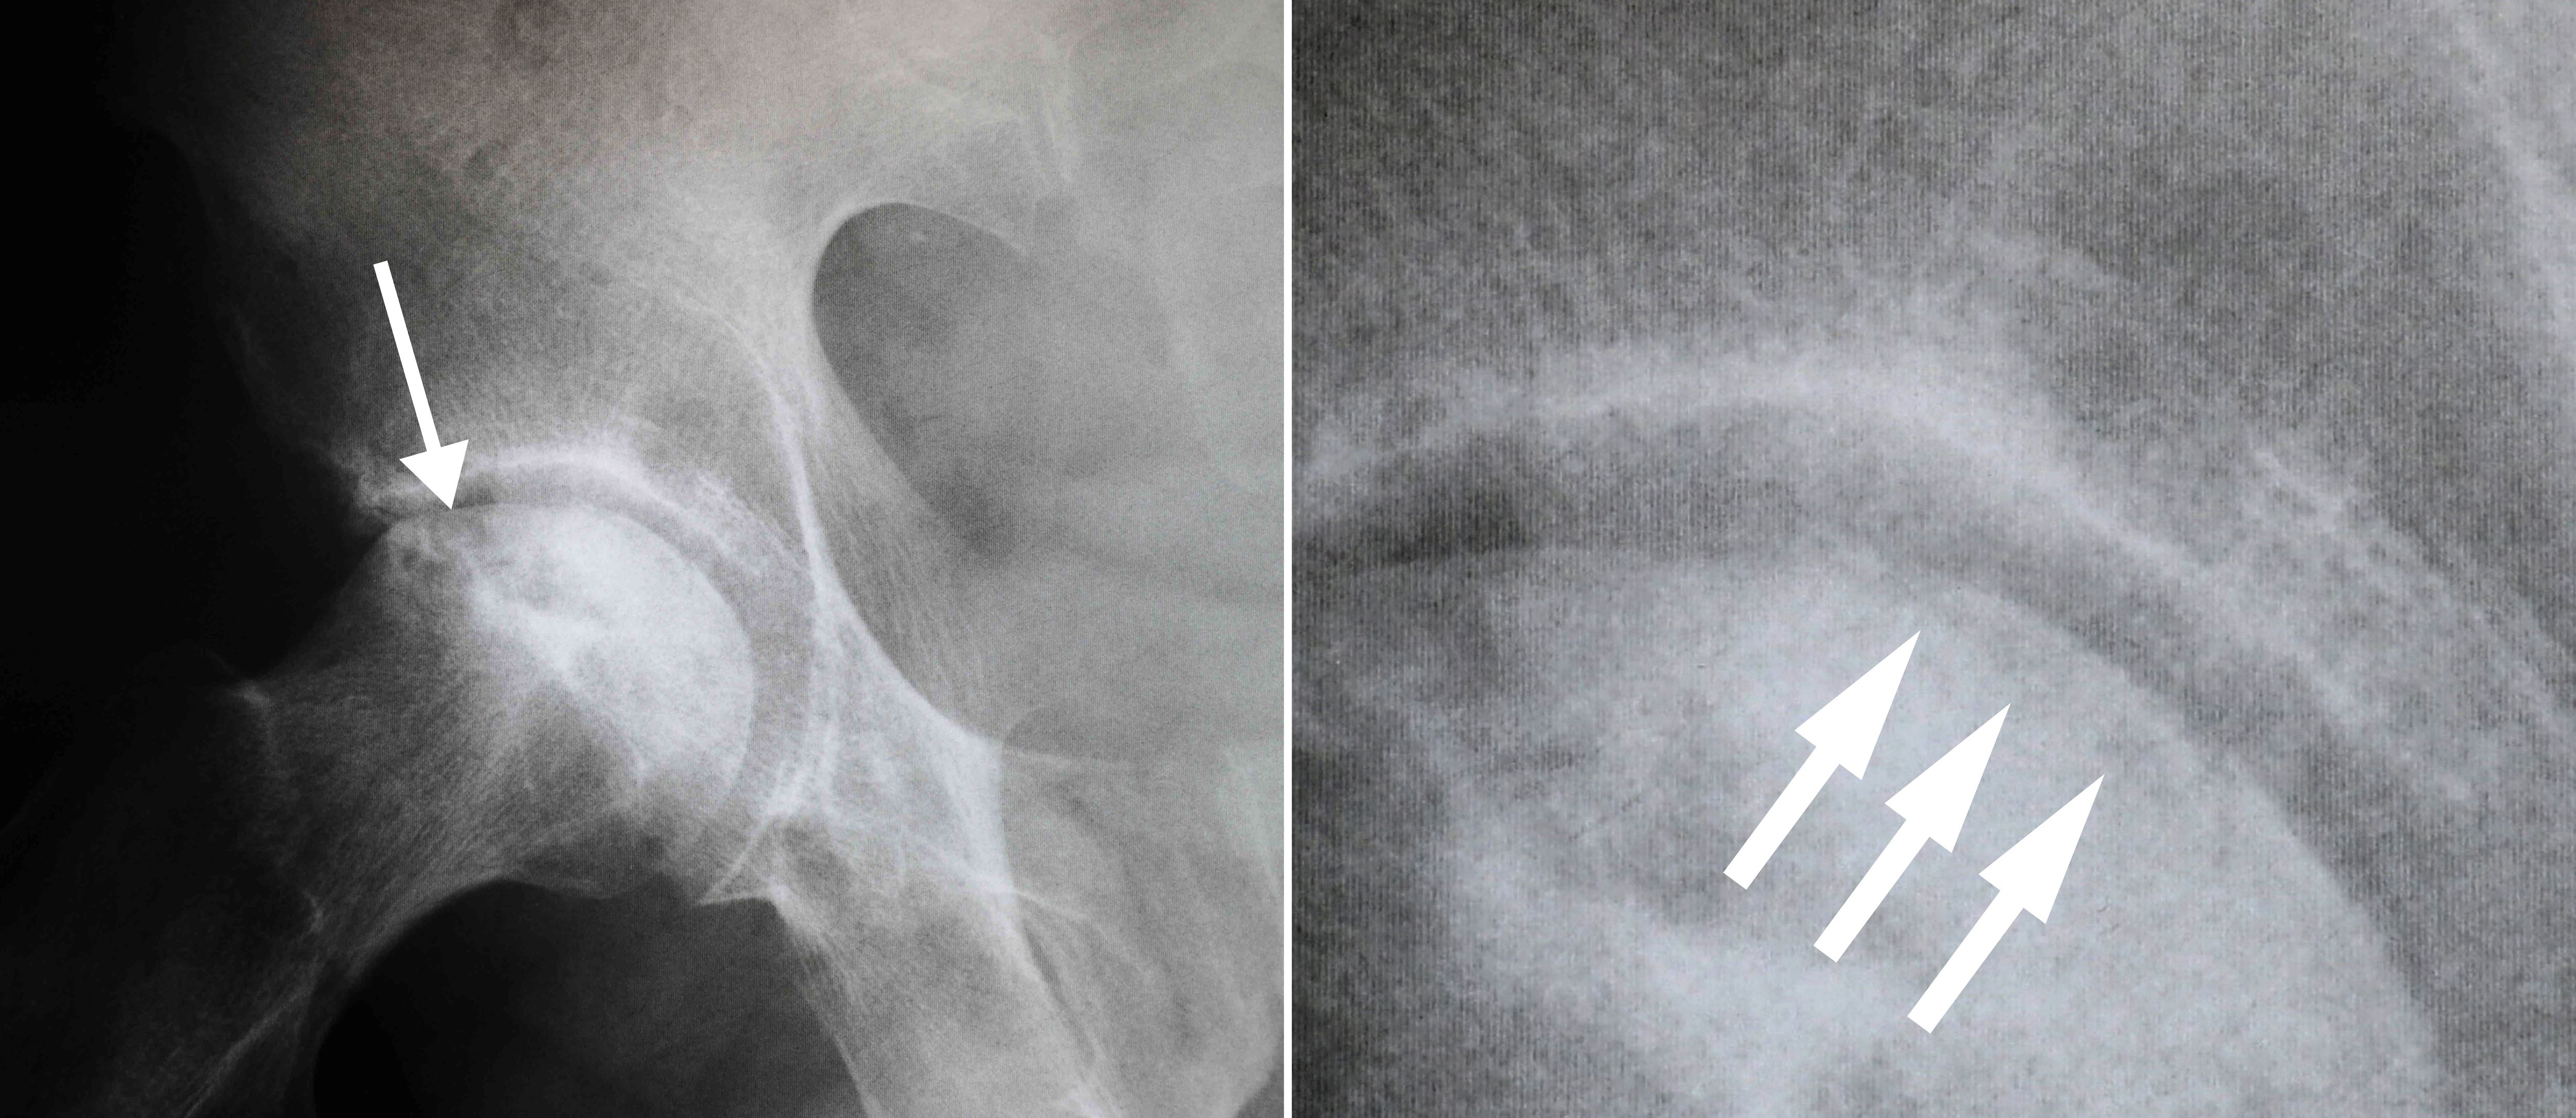 Osteonecrosis Of The Hip Orthoinfo Aaos